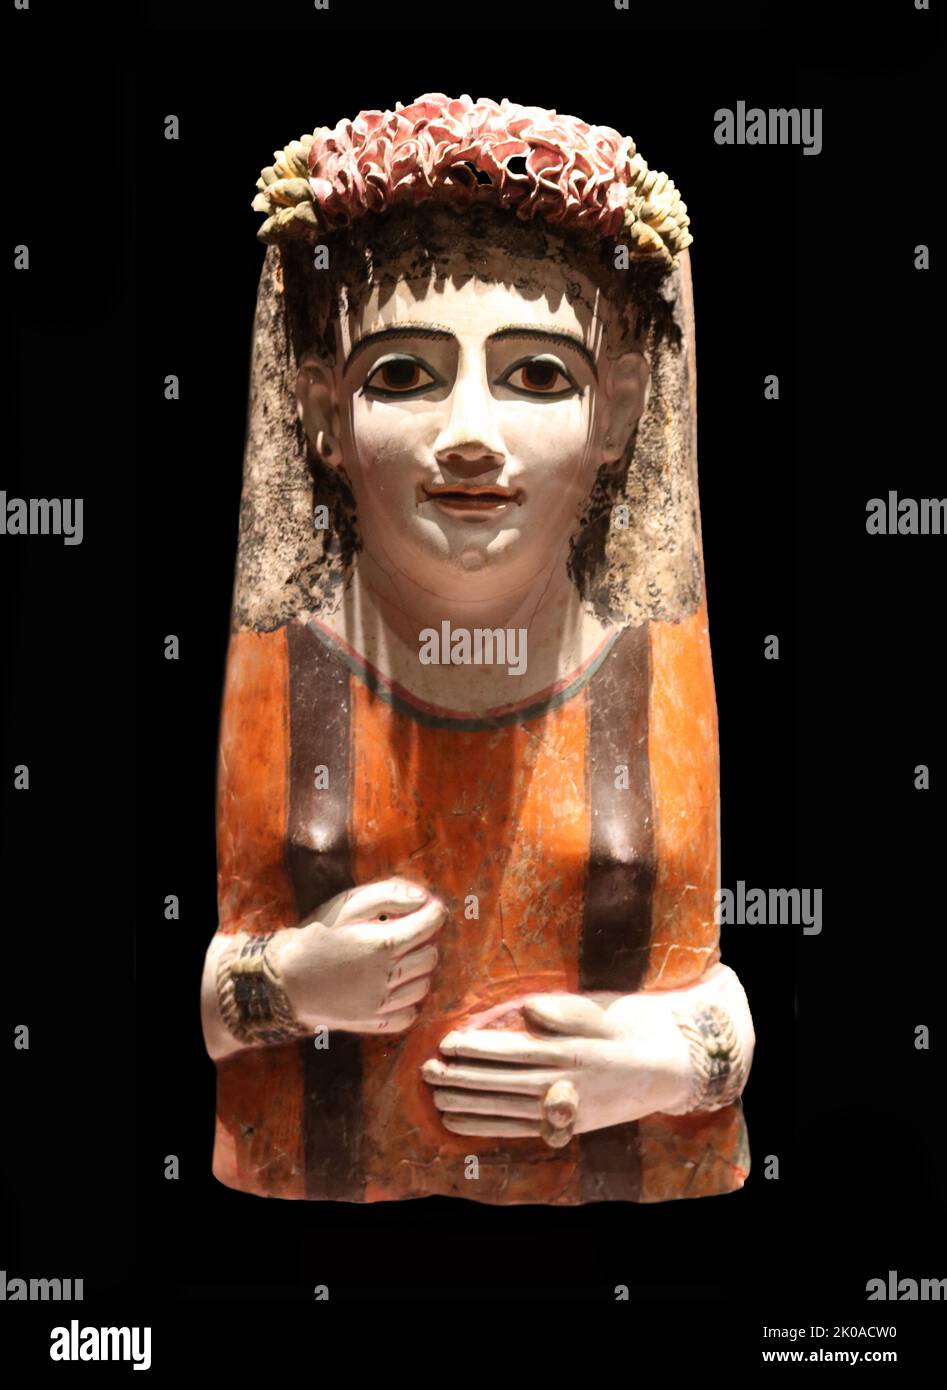 Mummy mask from a coffin in Asyut, Egypt. Roman Period, 1st century AD Stock Photo